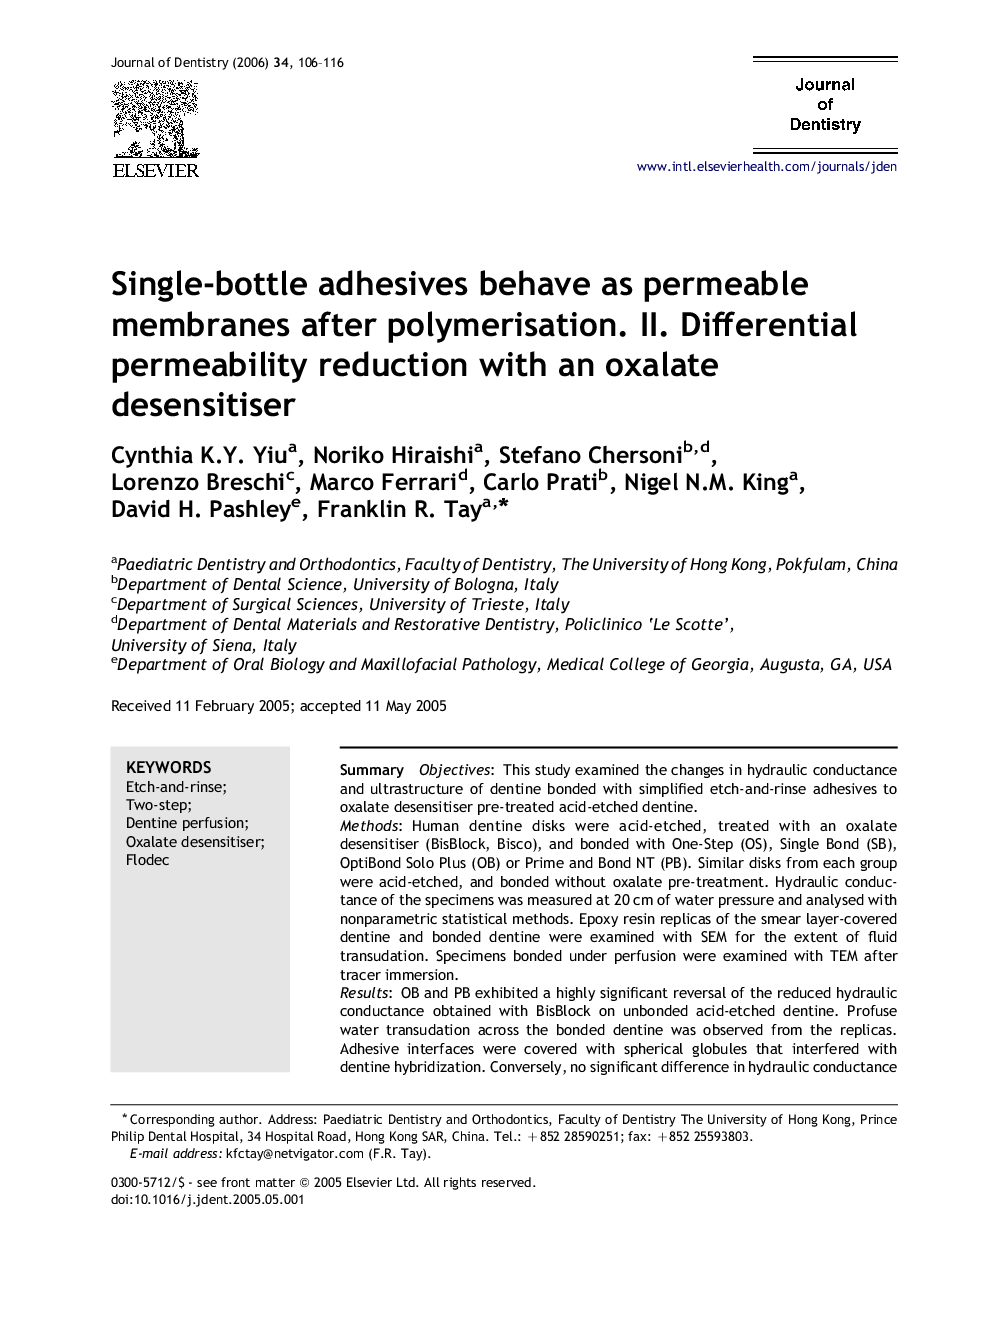 Single-bottle adhesives behave as permeable membranes after polymerisation. II. Differential permeability reduction with an oxalate desensitiser